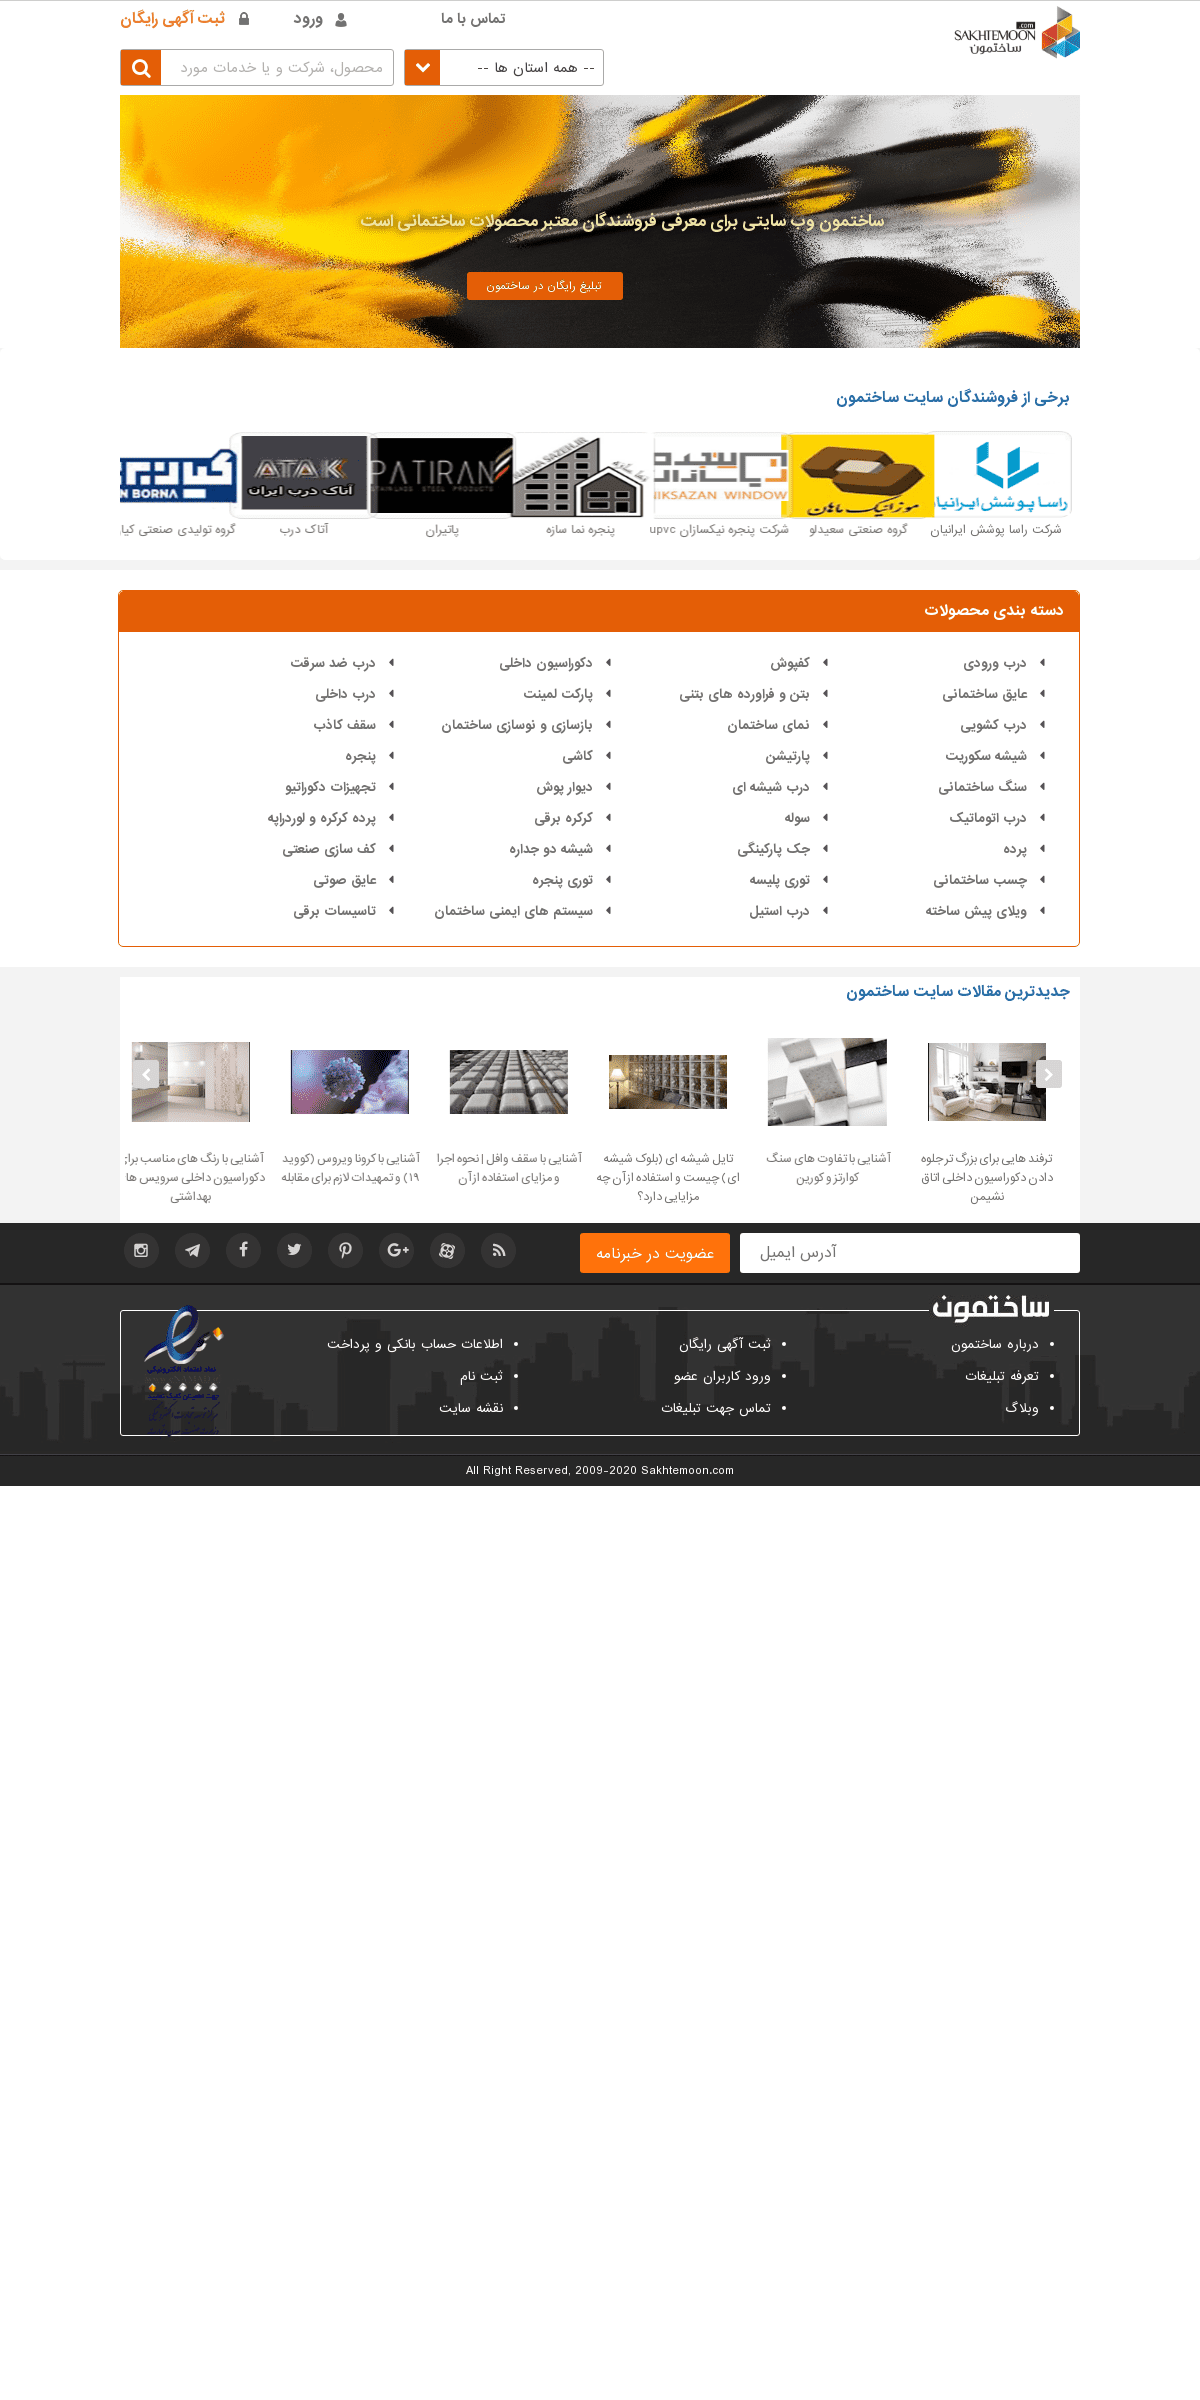 A complete backup of sakhtemoon.com